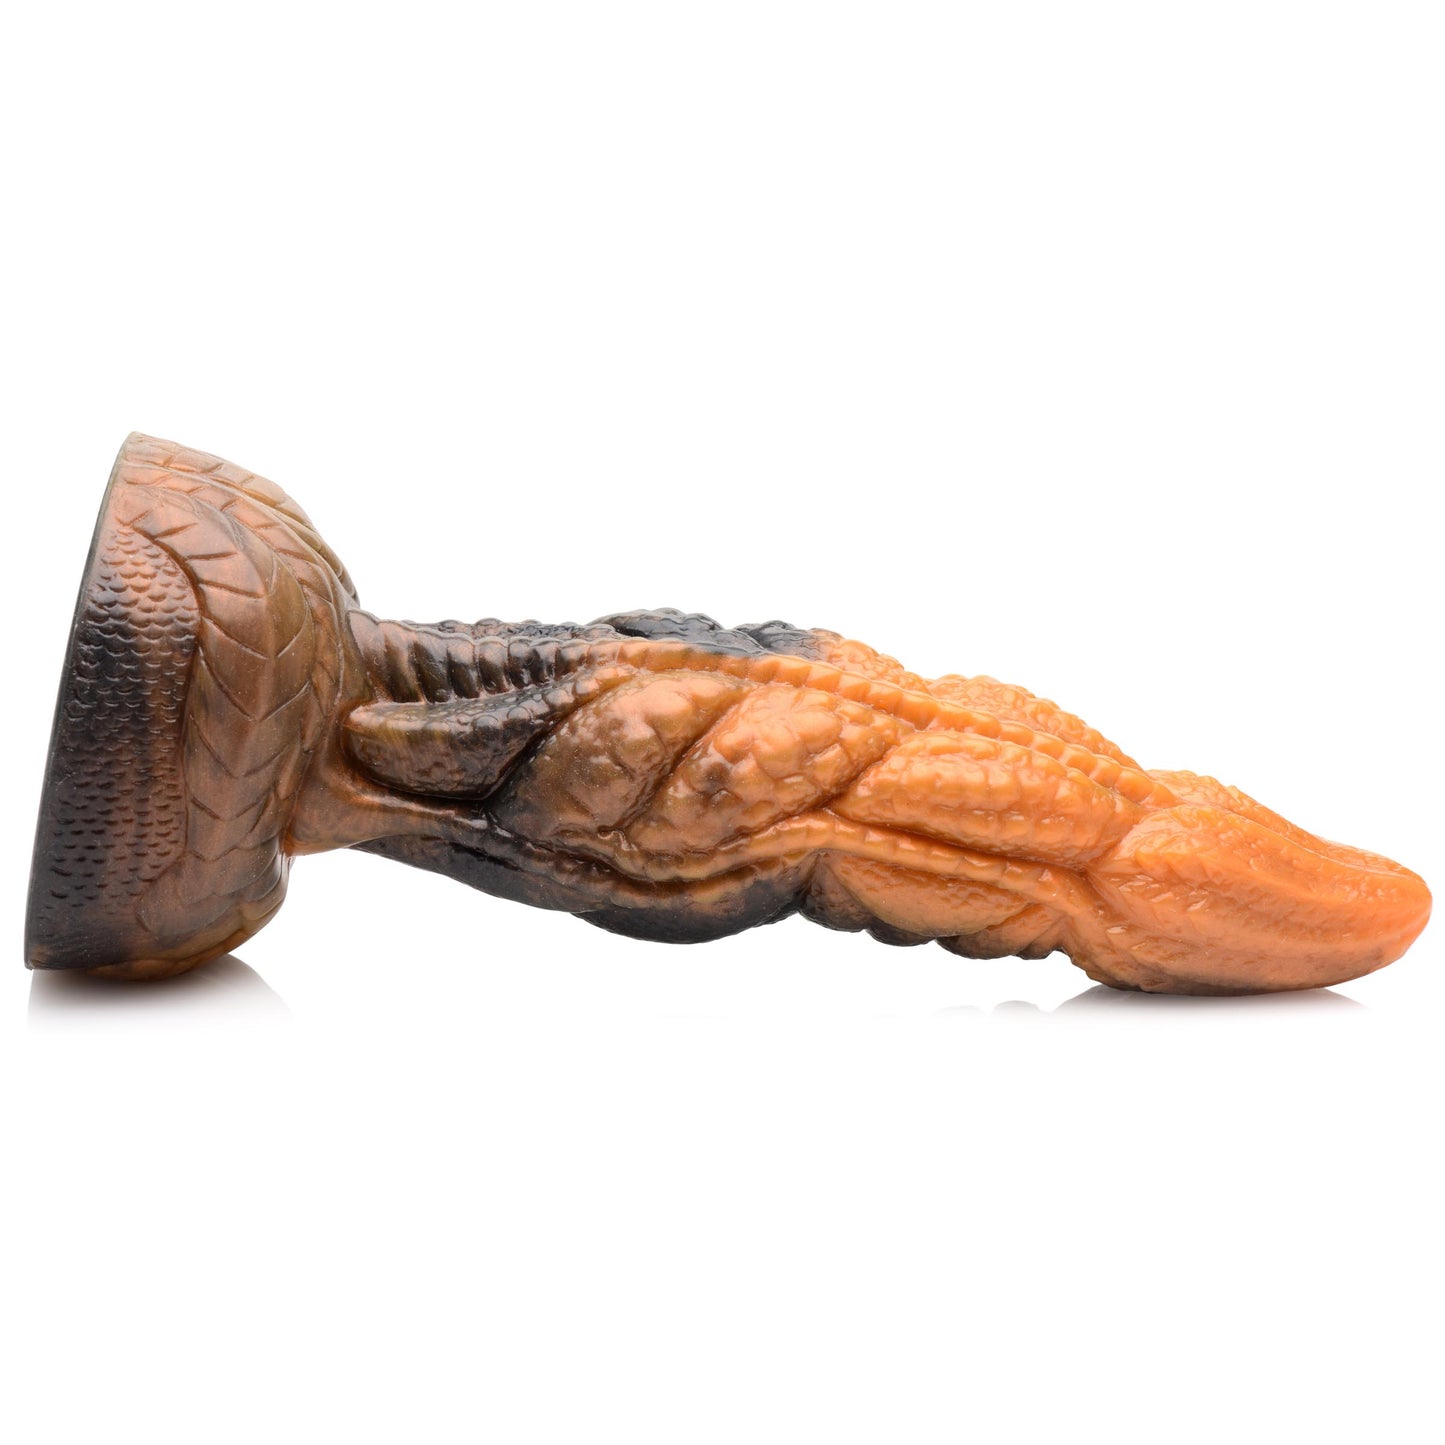 Ravager Rippled Tentacle Silicone Dildo - UABDSM